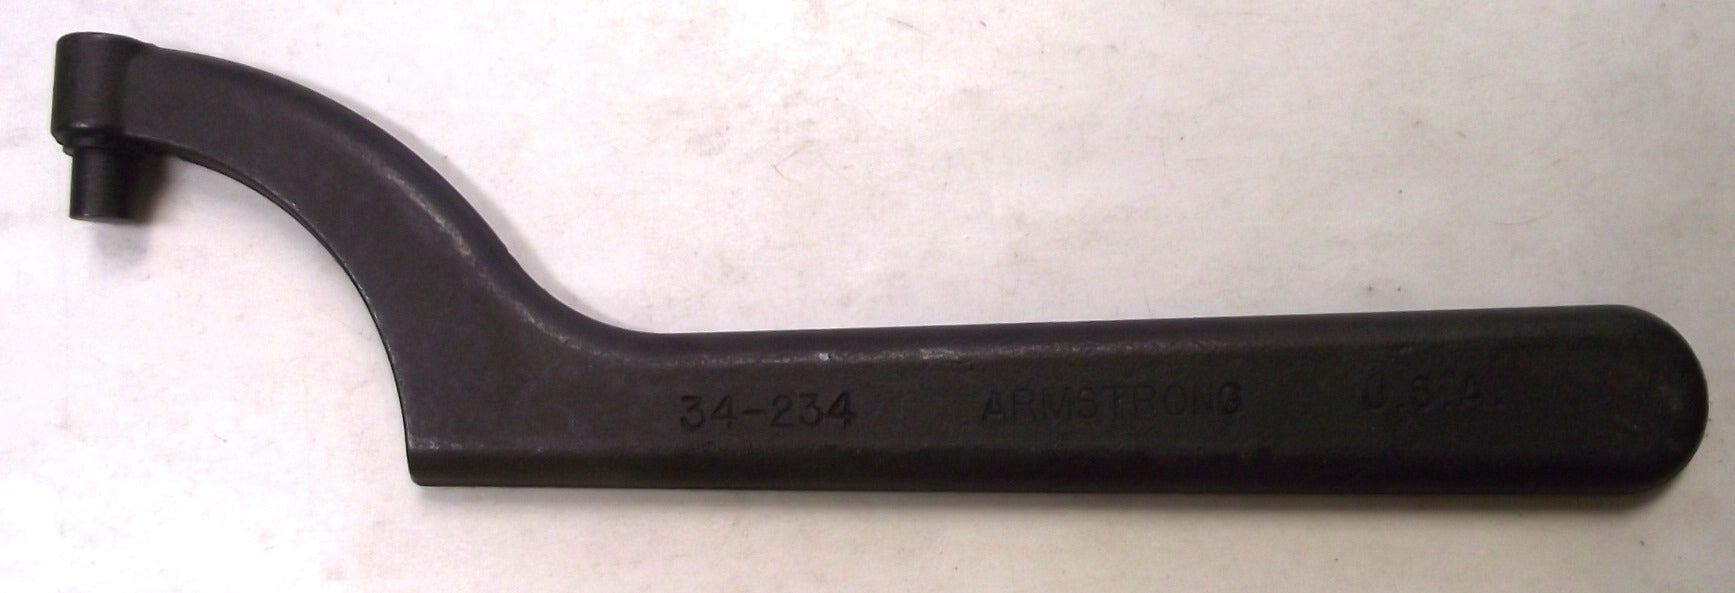 Armstrong 34-234 3-3/4" Pin Spanner Wrench USA